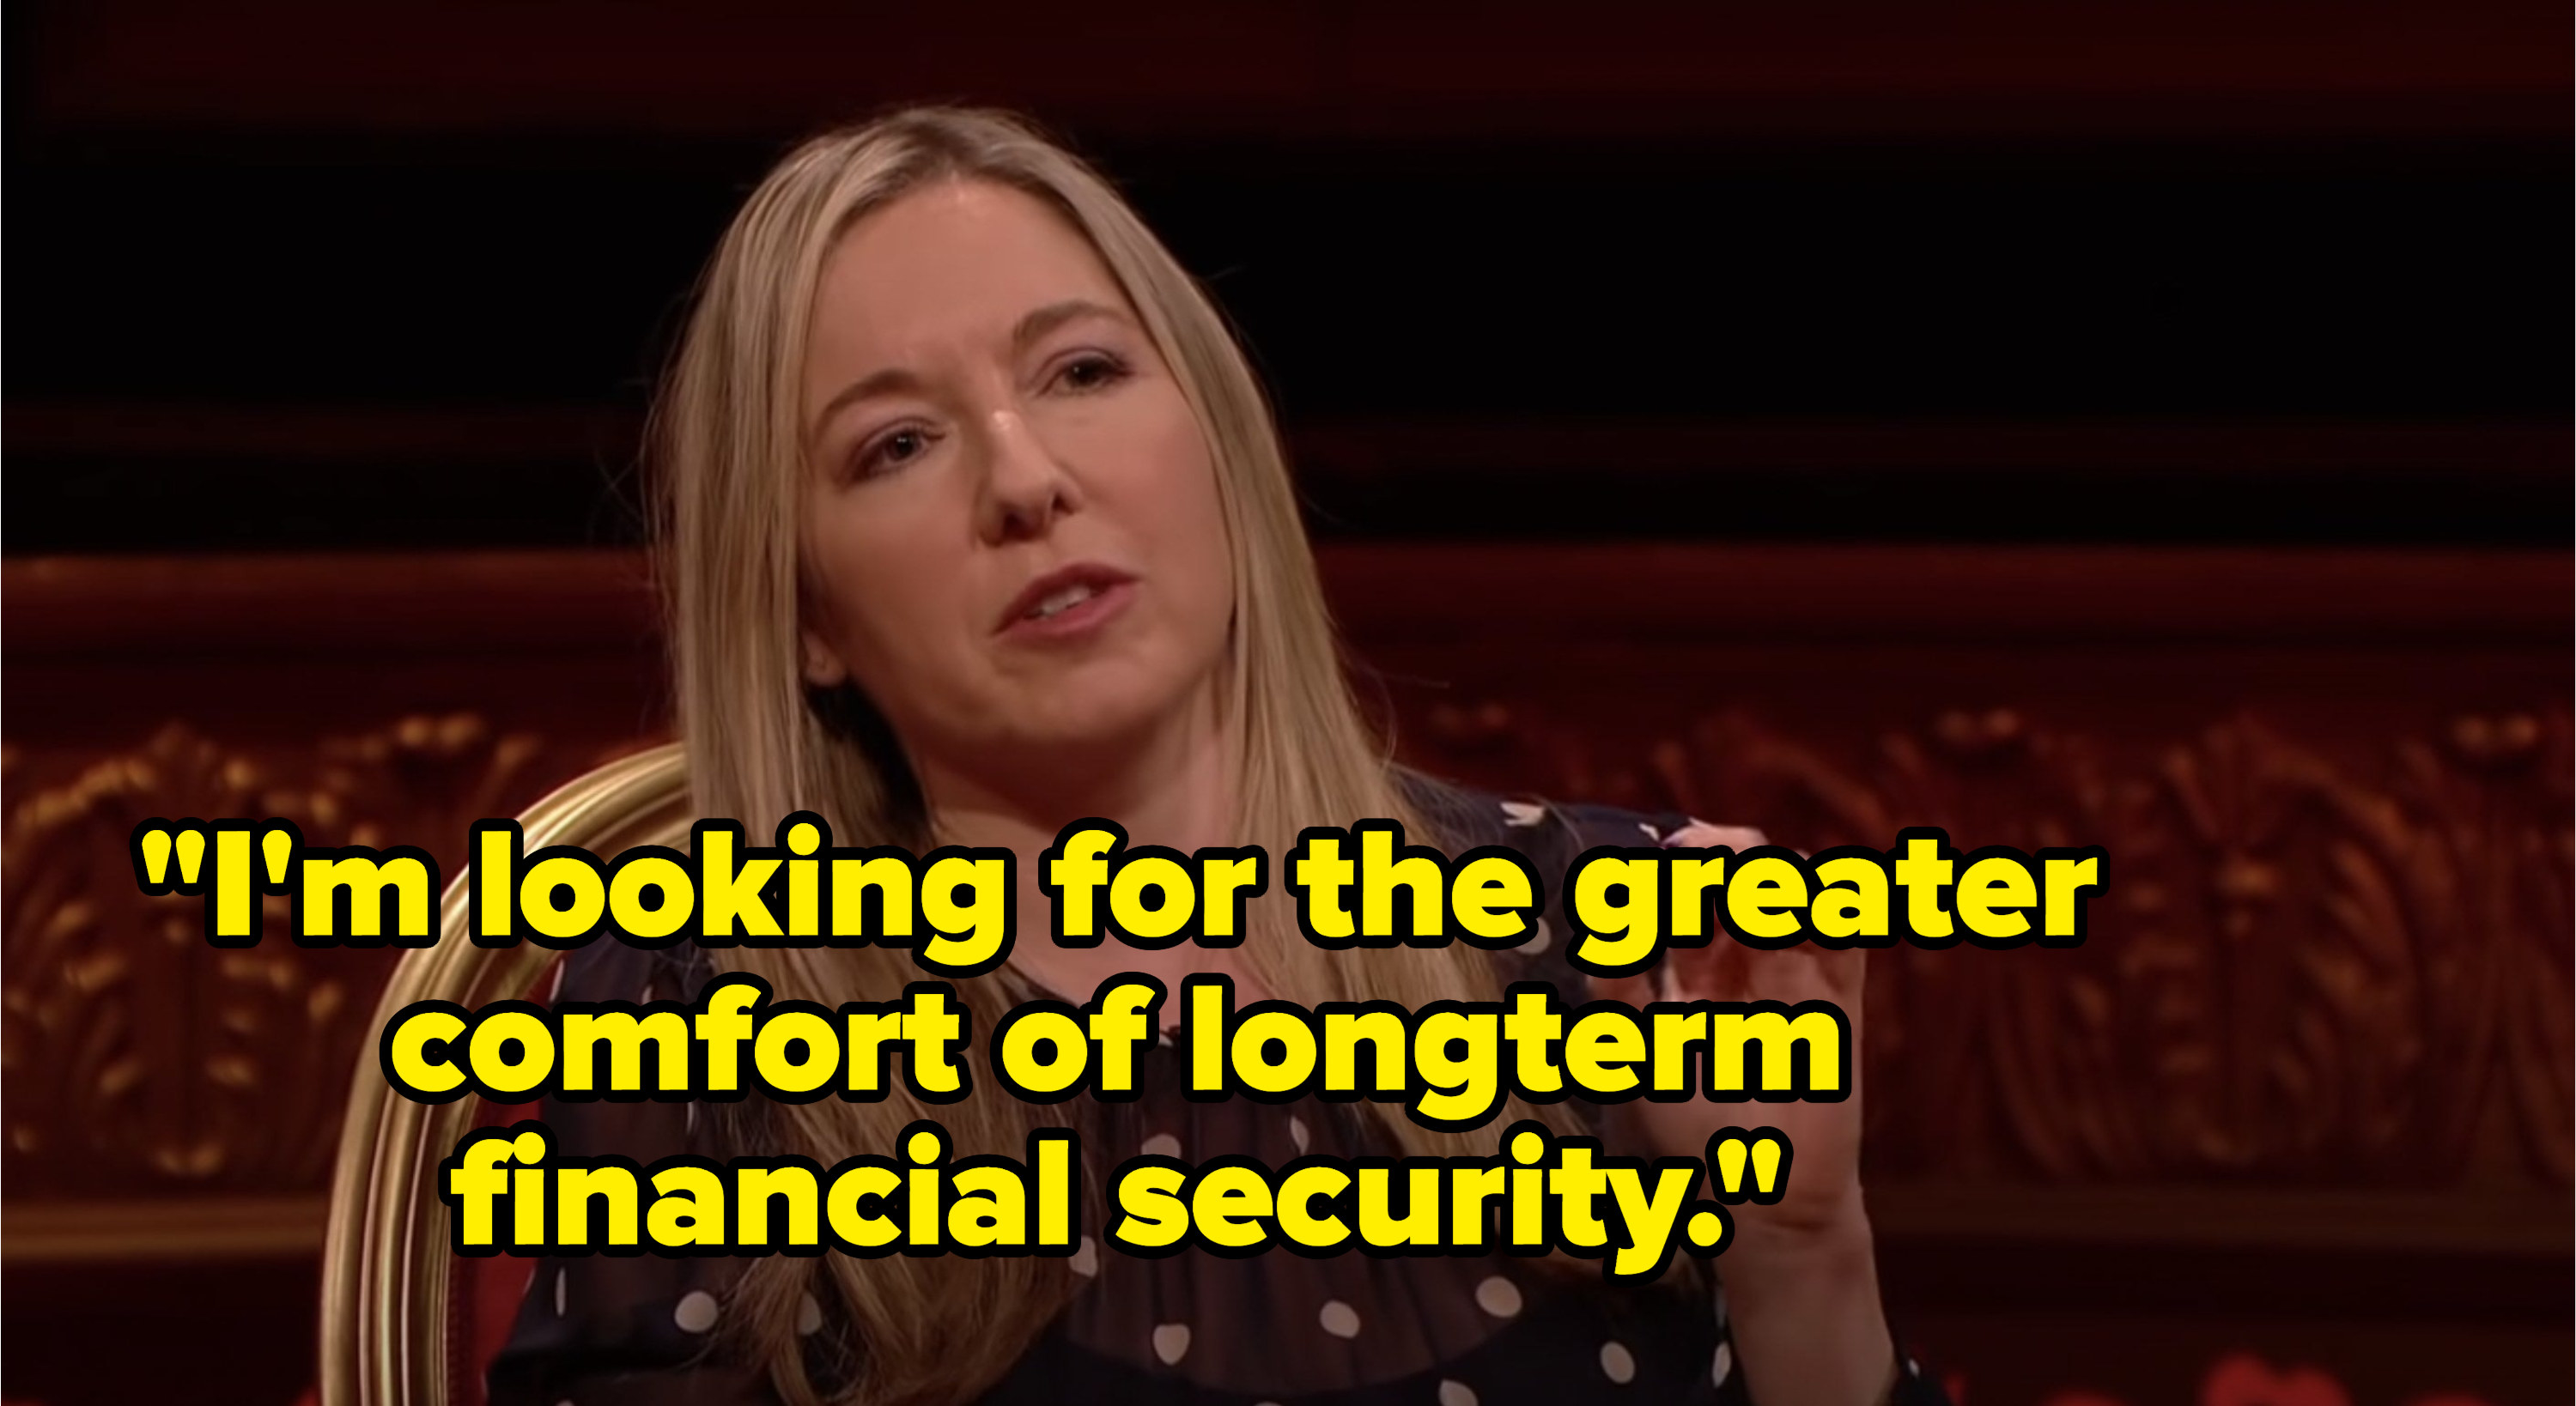 Victoria Coren Mitchell says, Im looking for the greater comfort of longterm financial security